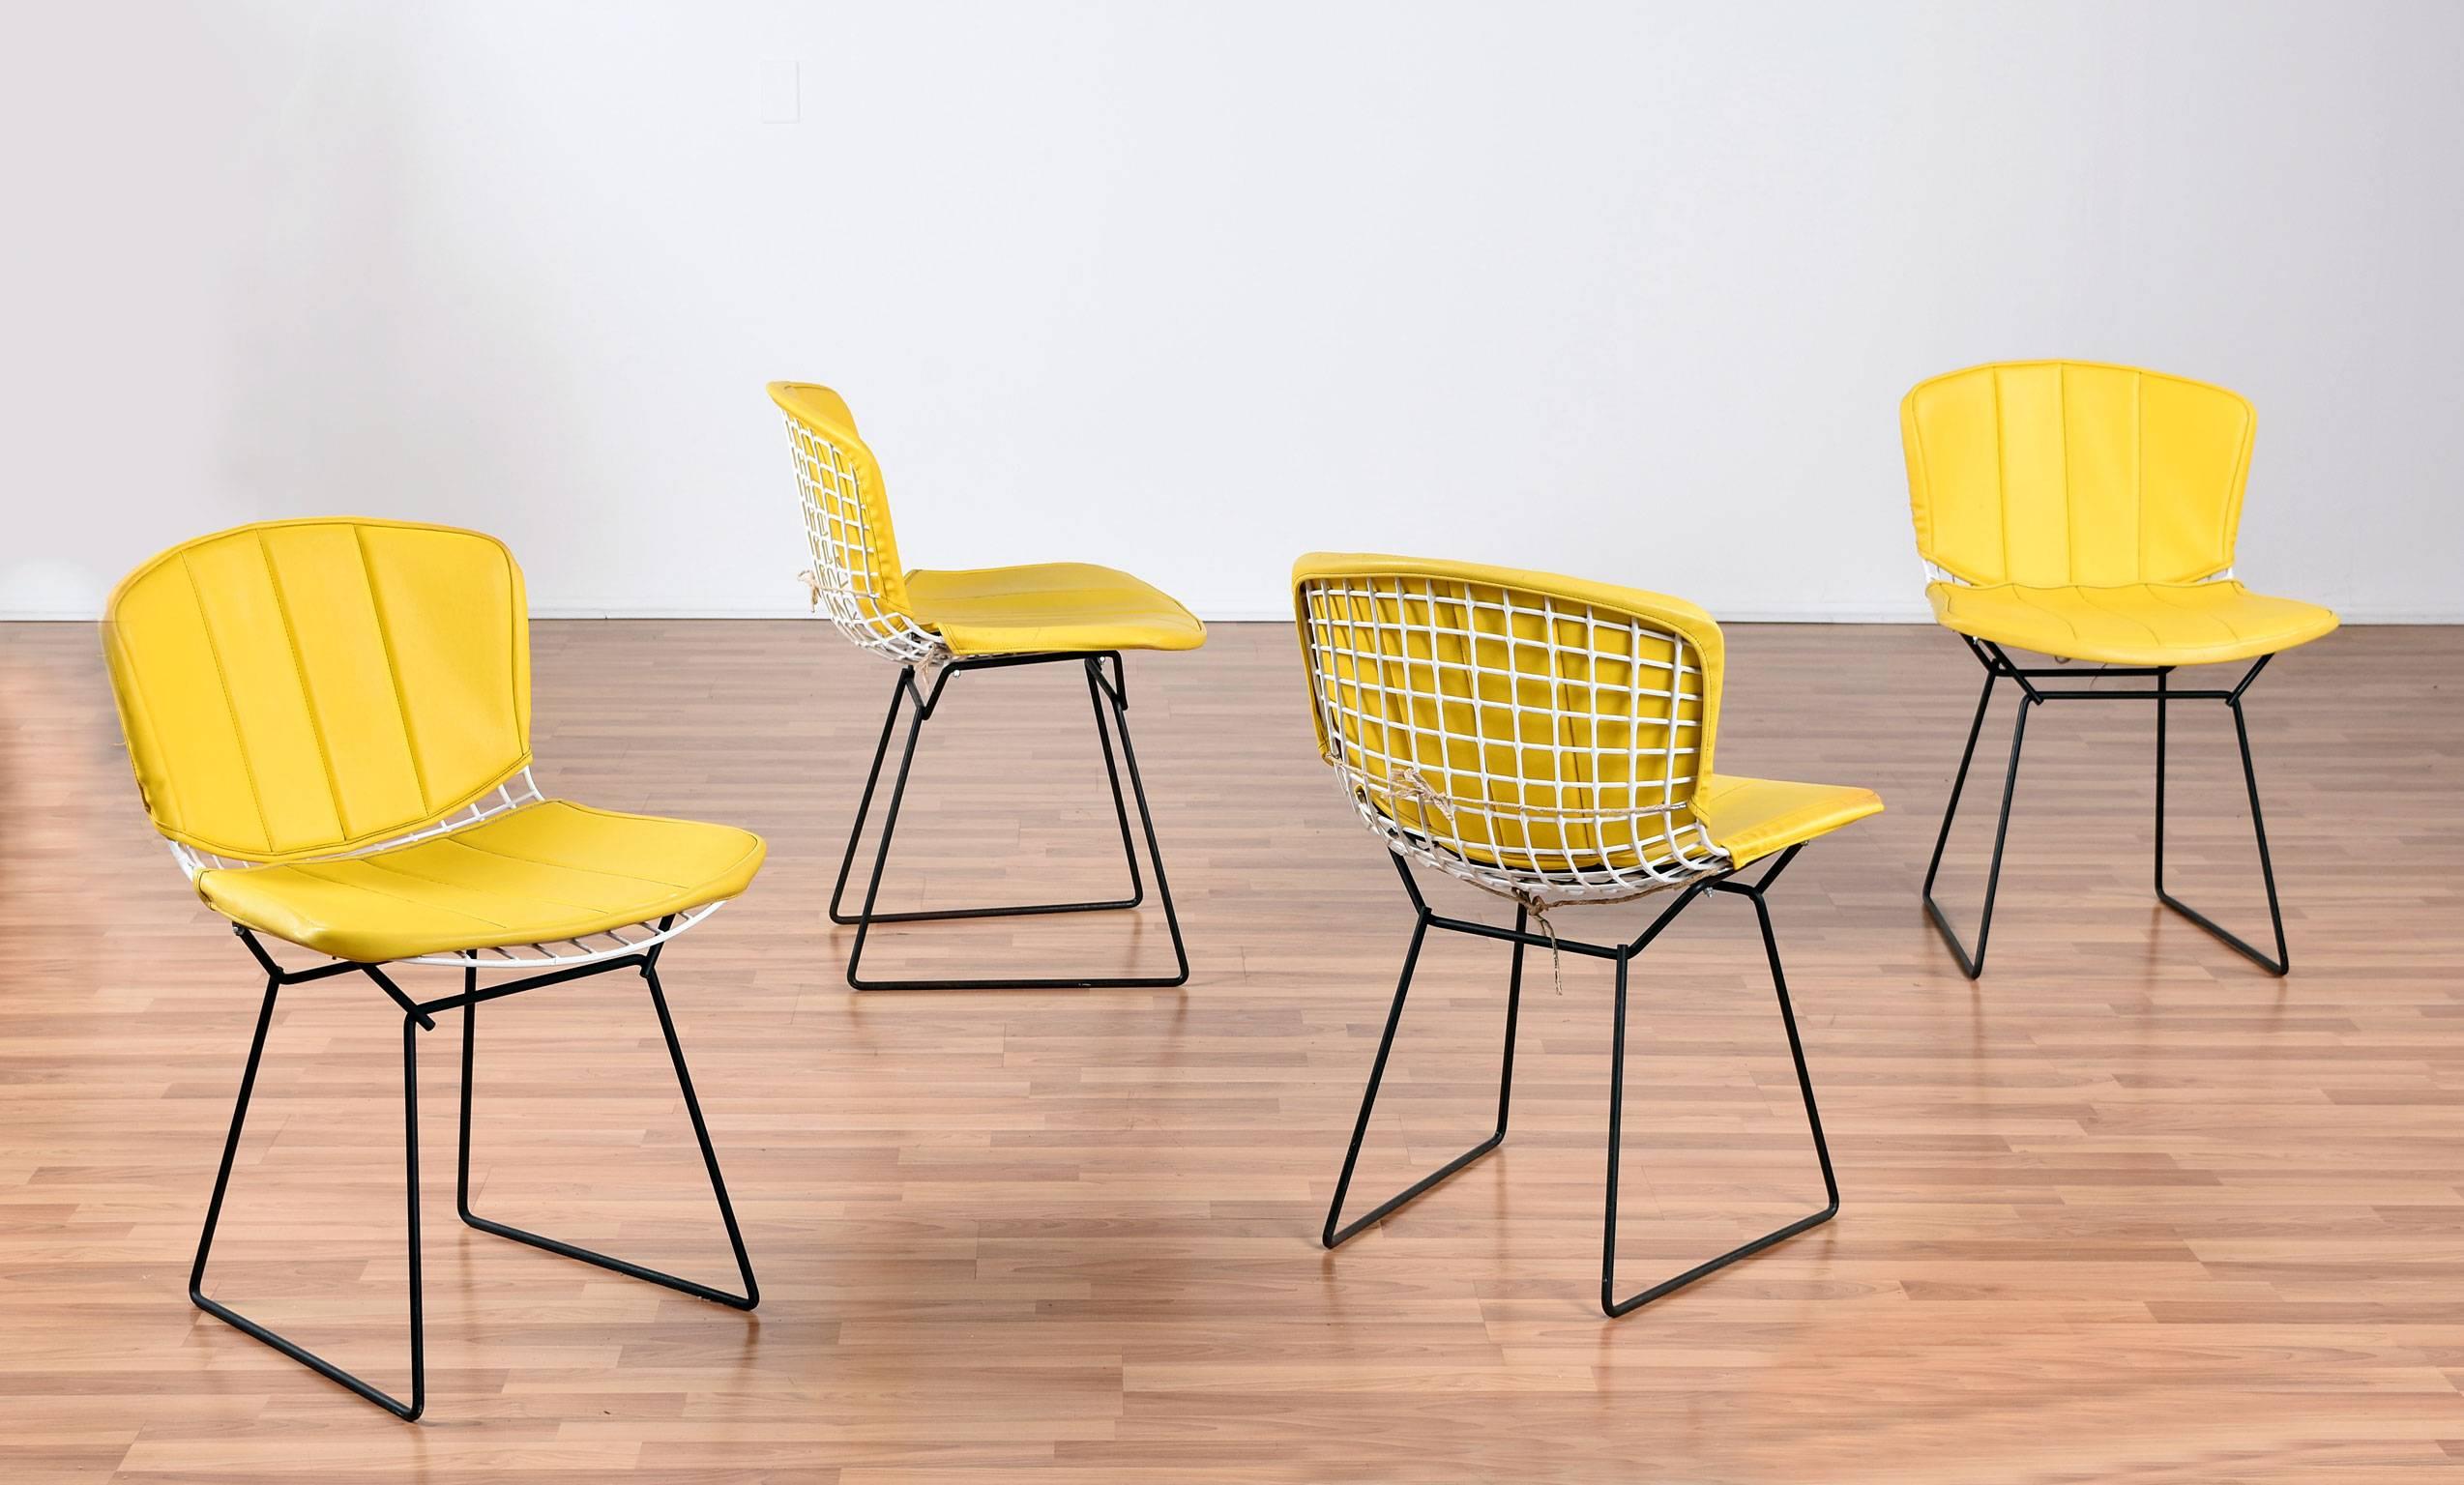 We are pleased to offer this set of four authentic Harry Bertoia wire chairs for Knoll. First designed in the mid-1950s for Knoll. The Bertoia side chair has become one of the iconic classics of the Mid-Century Modern era. This vintage set comes